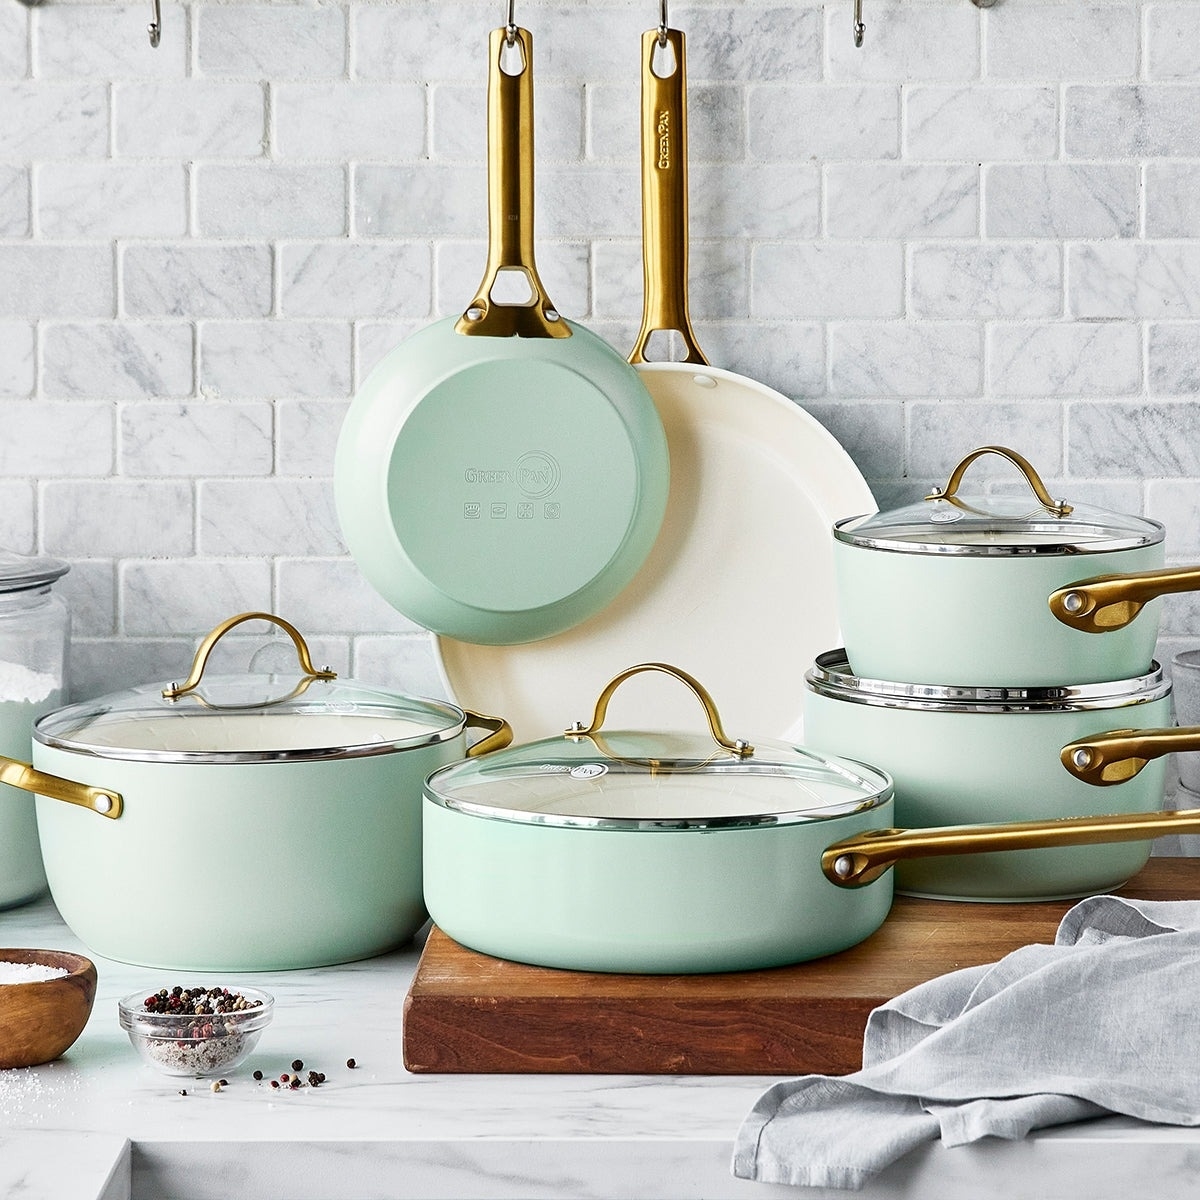 the 10-piece cookware set with pots, pans, and skillets with gold-tone handles